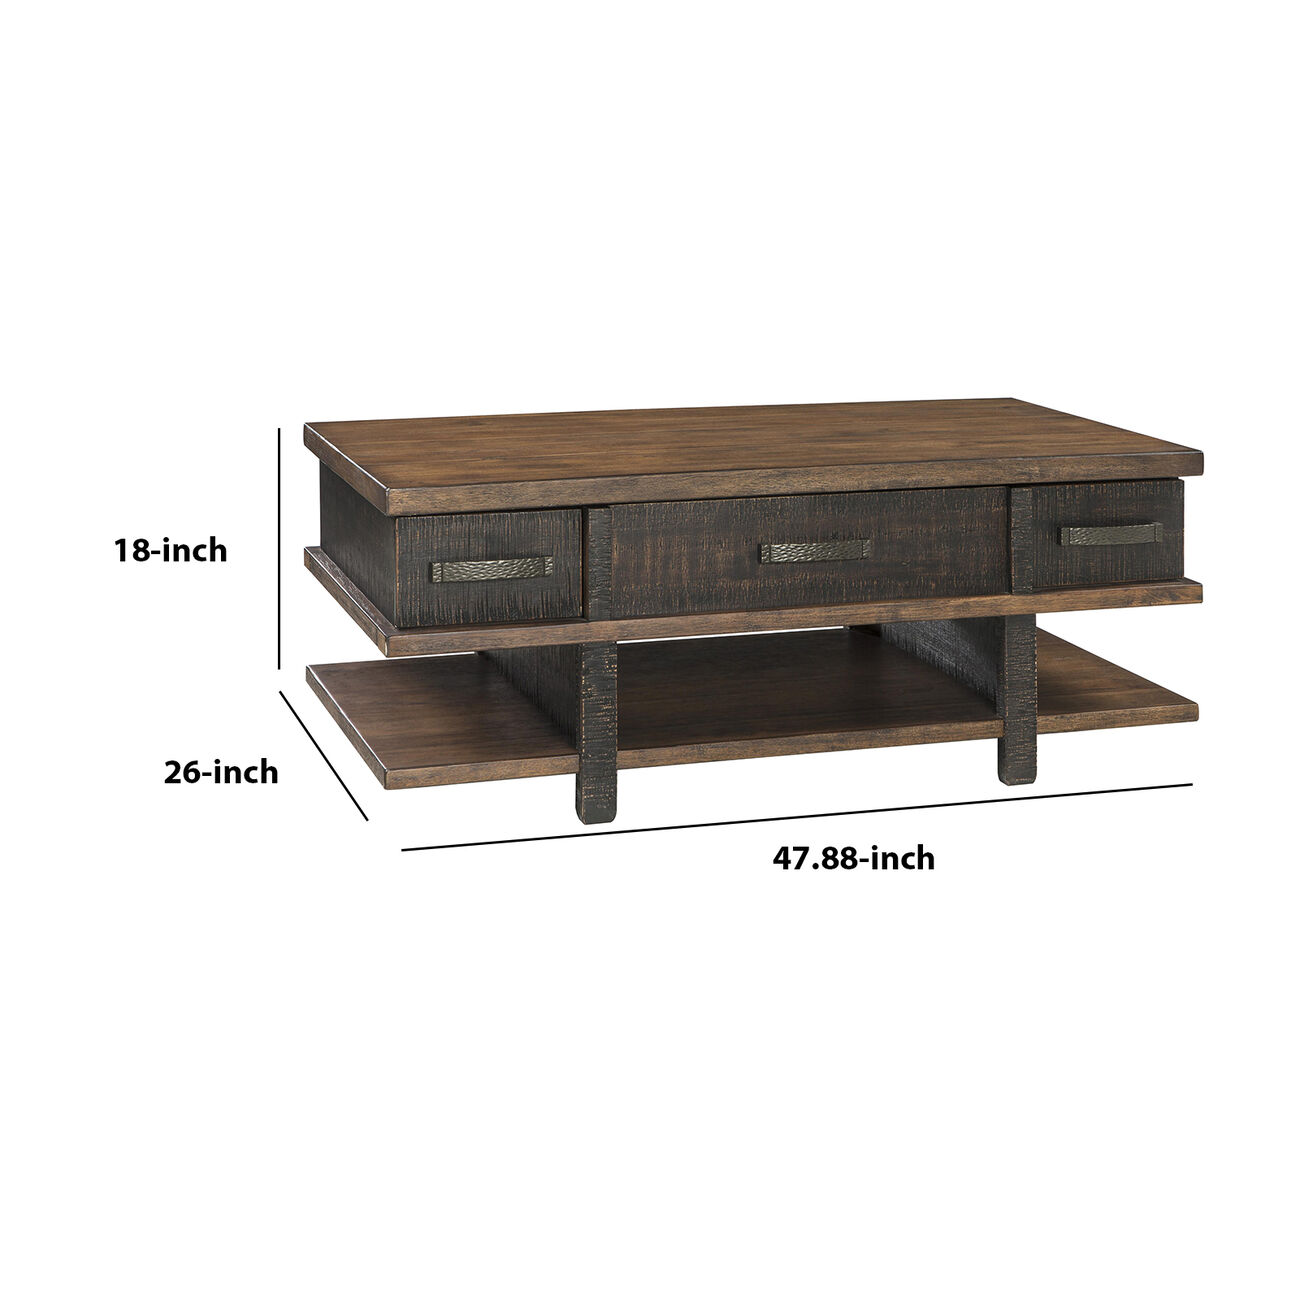 Wooden Lift Top Cocktail Table with 2 Drawers and 3 Open Shelves, Brown